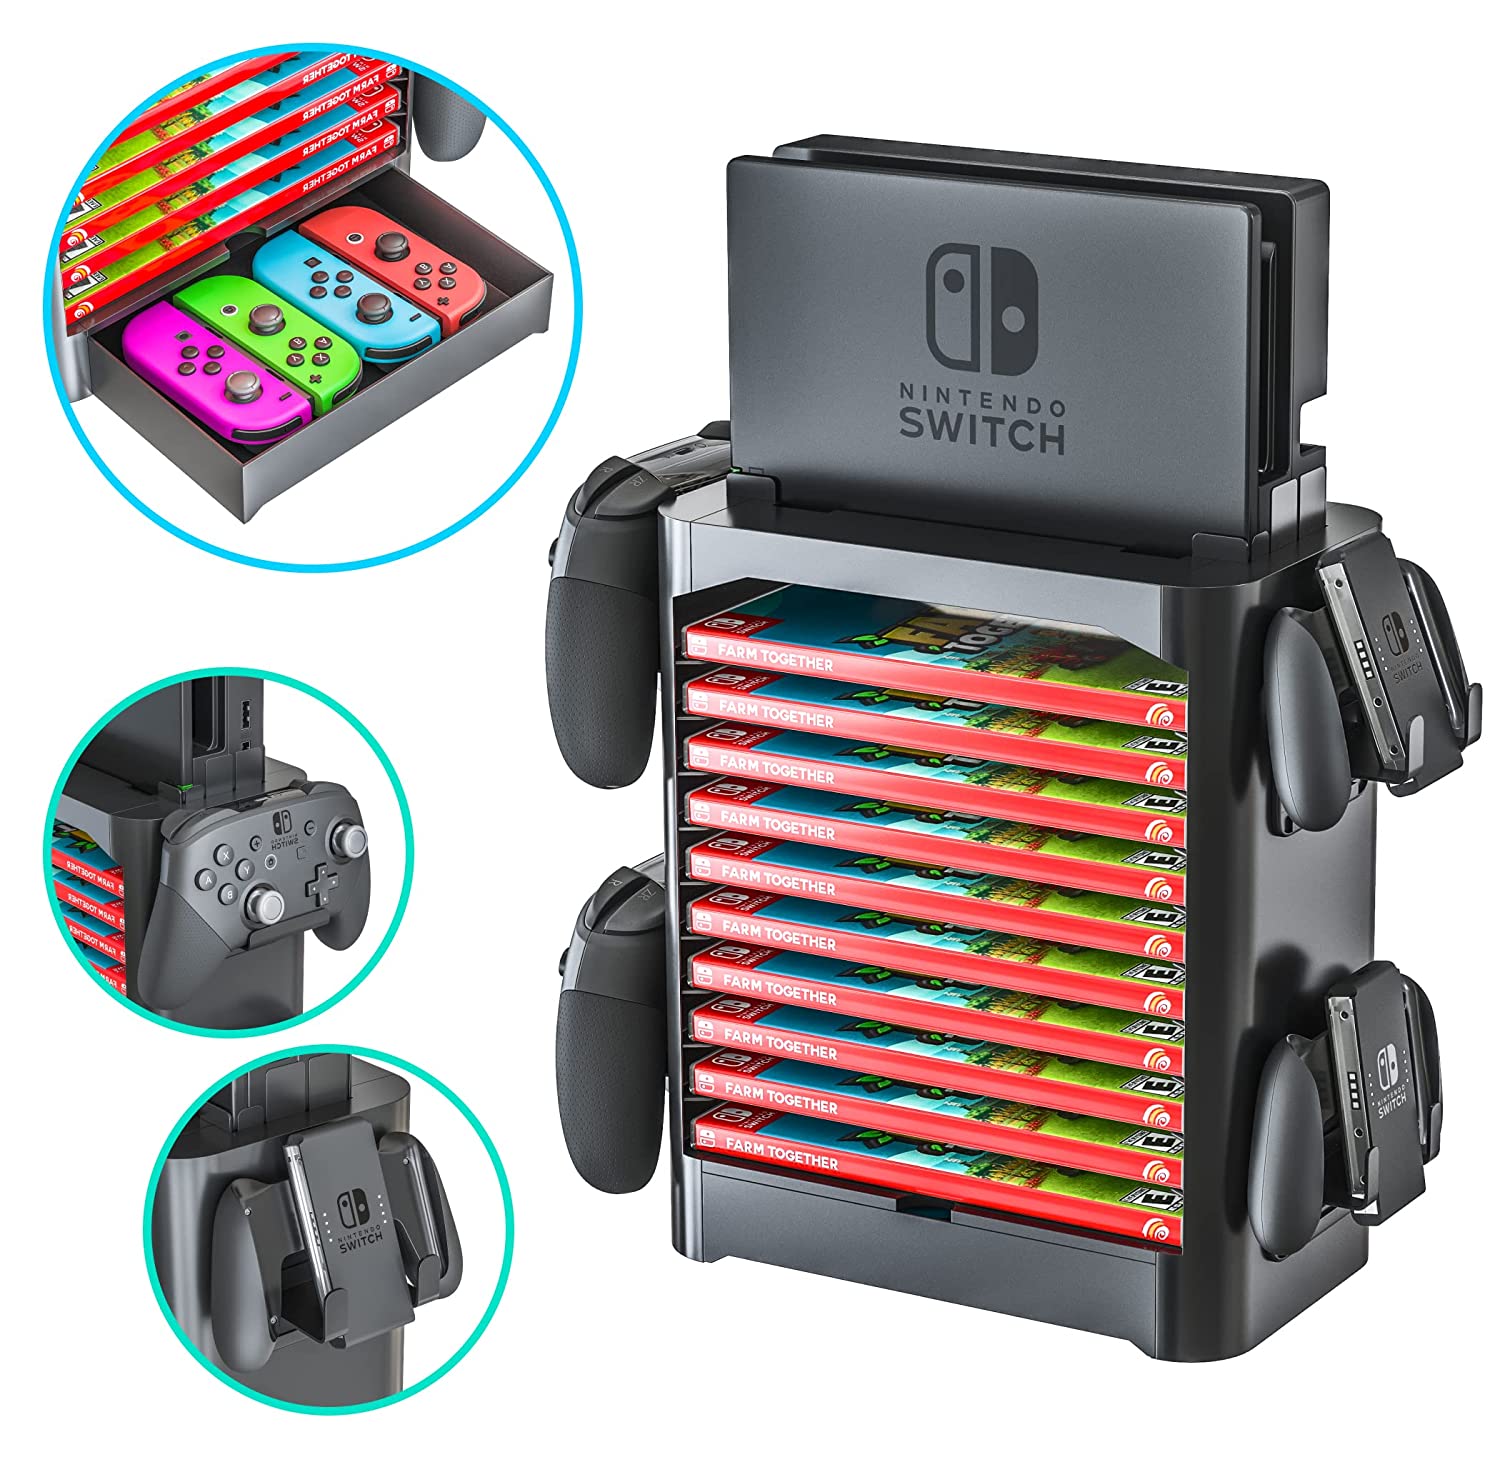 Skywin Game Storage Tower for Nintendo Switch.